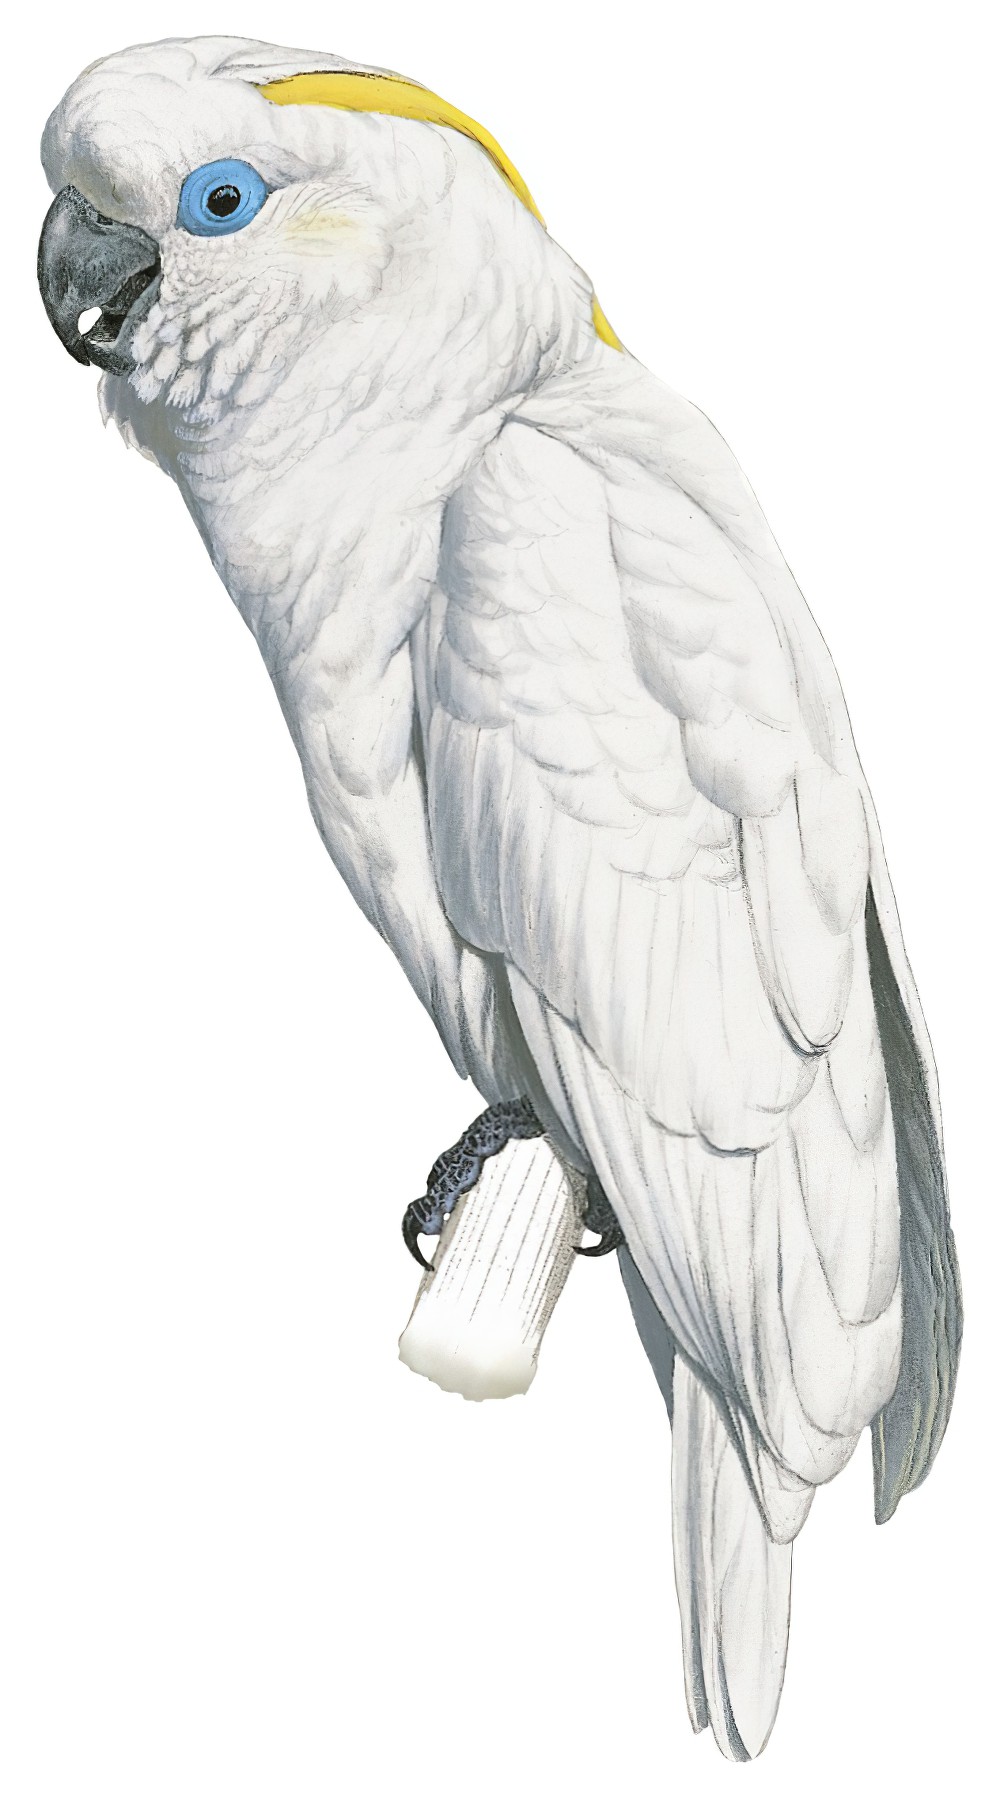 Blue-eyed Cockatoo / Cacatua ophthalmica